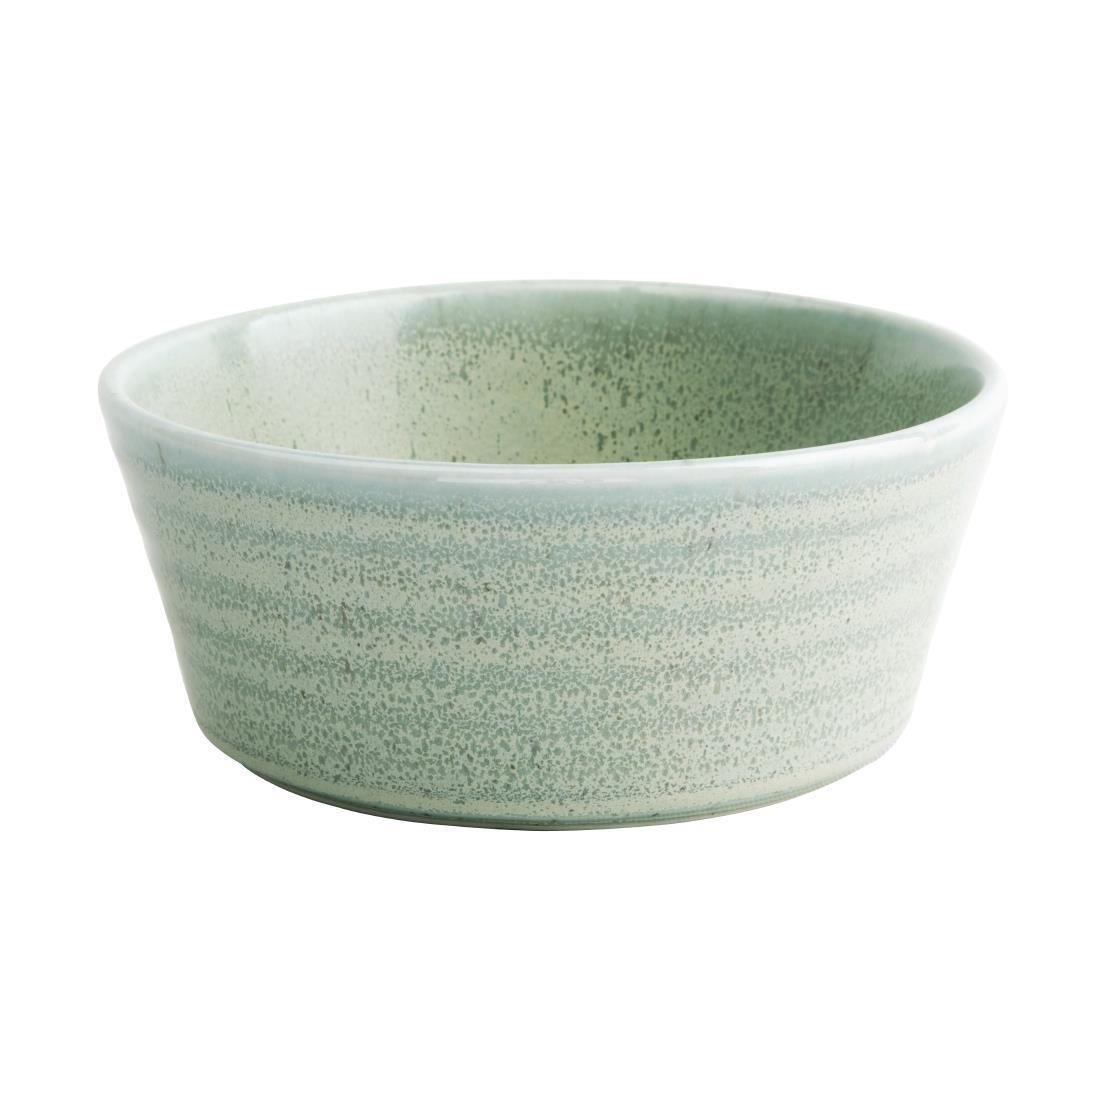 Olympia Cavolo Flat Round Bowls Spring Green 143mm (Pack of 6) - FB560  - 1